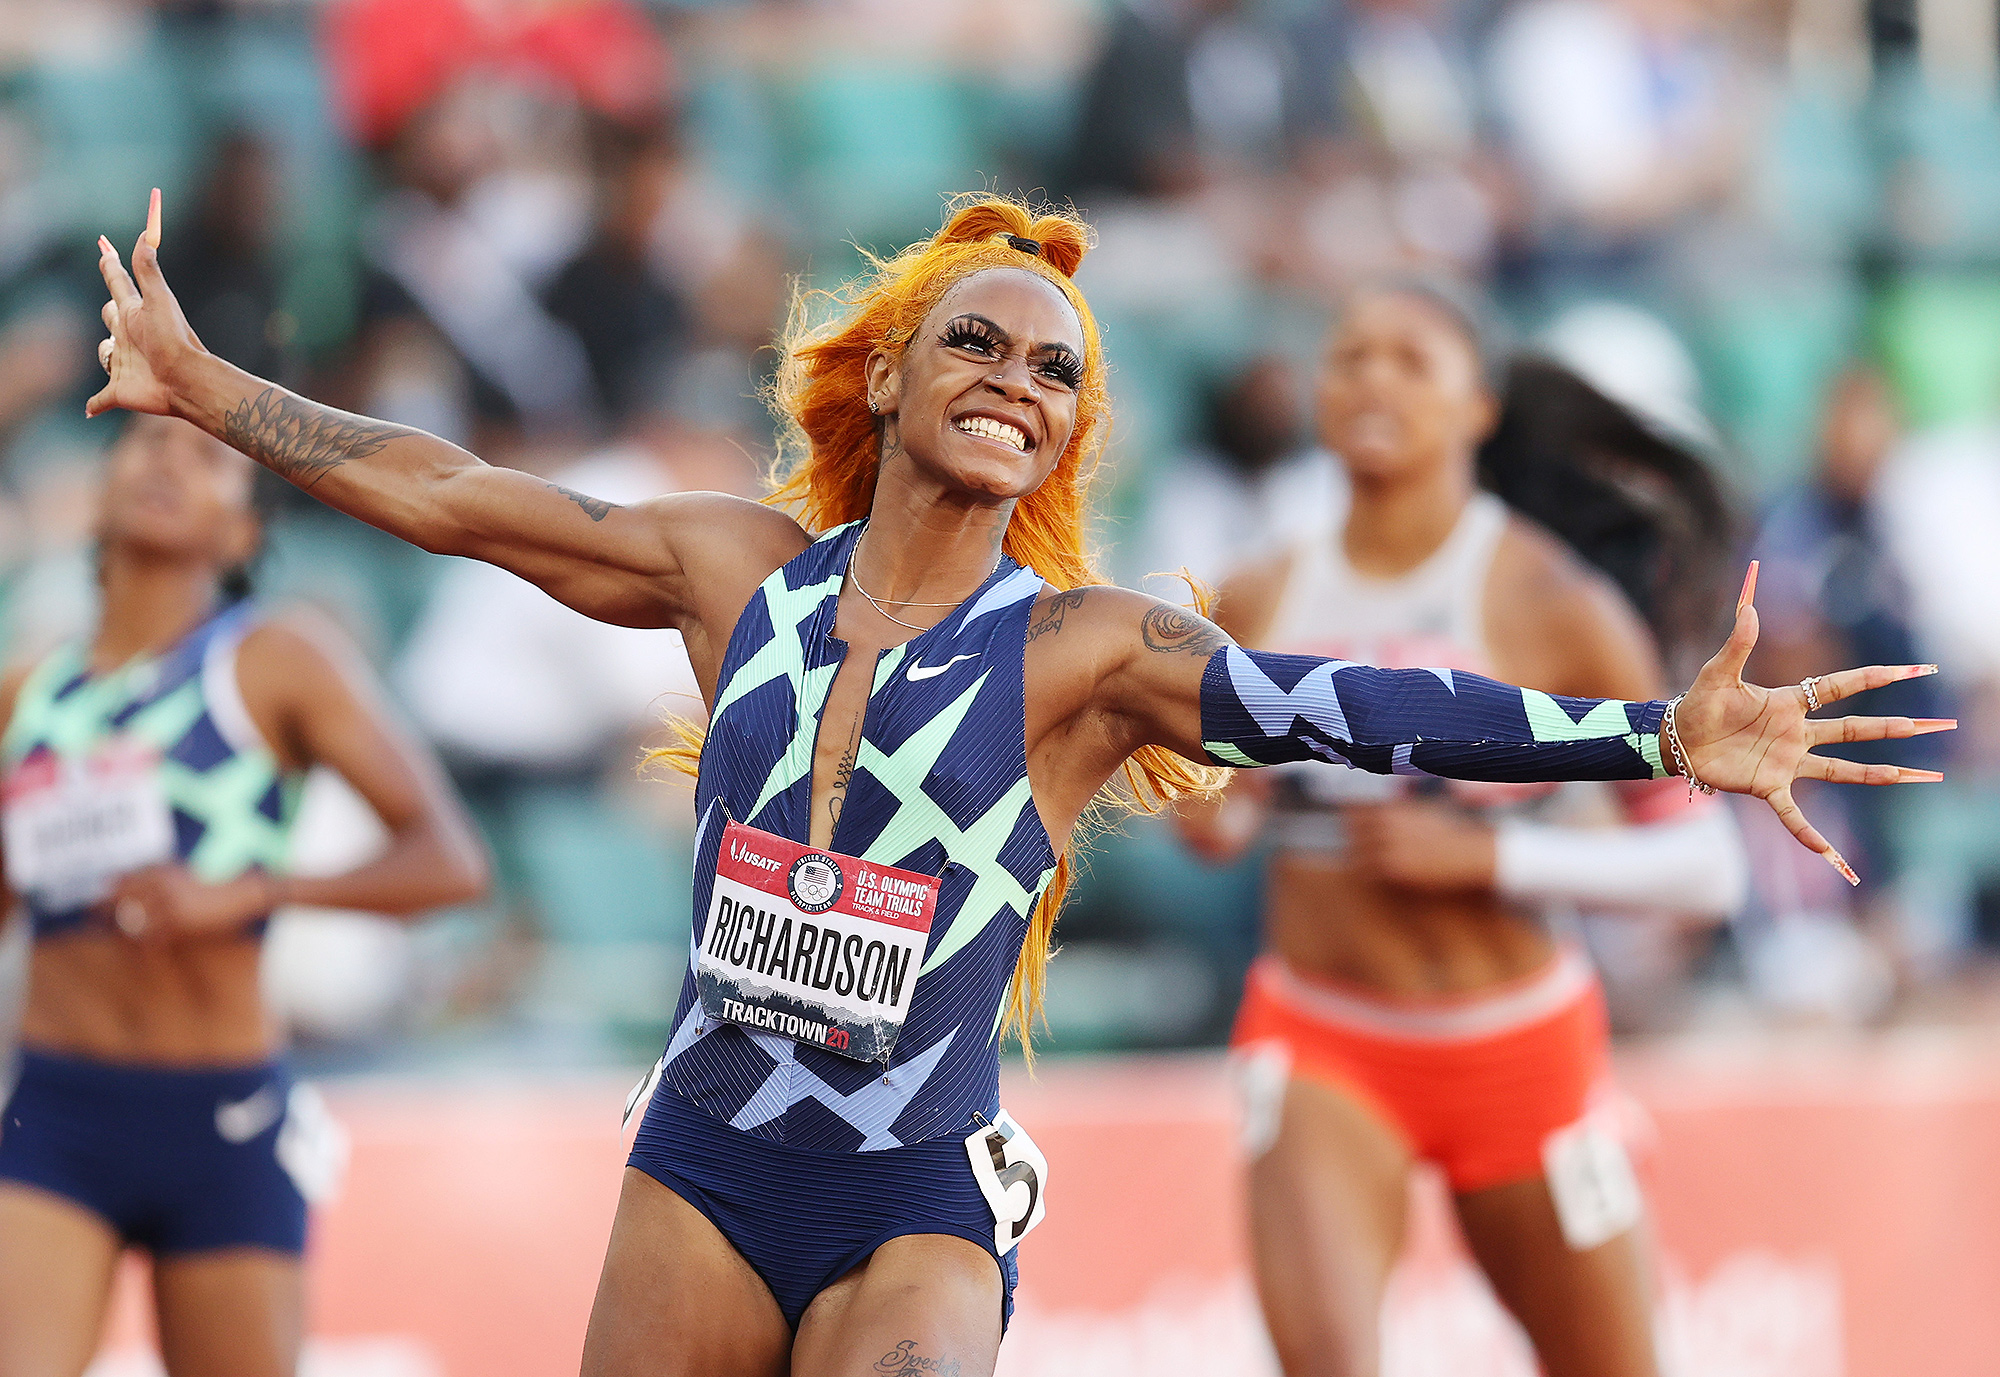 Petitioners Demand Sha’Carri Richardson Be Allowed to Compete in the Olympics, Despite Positive THC Test